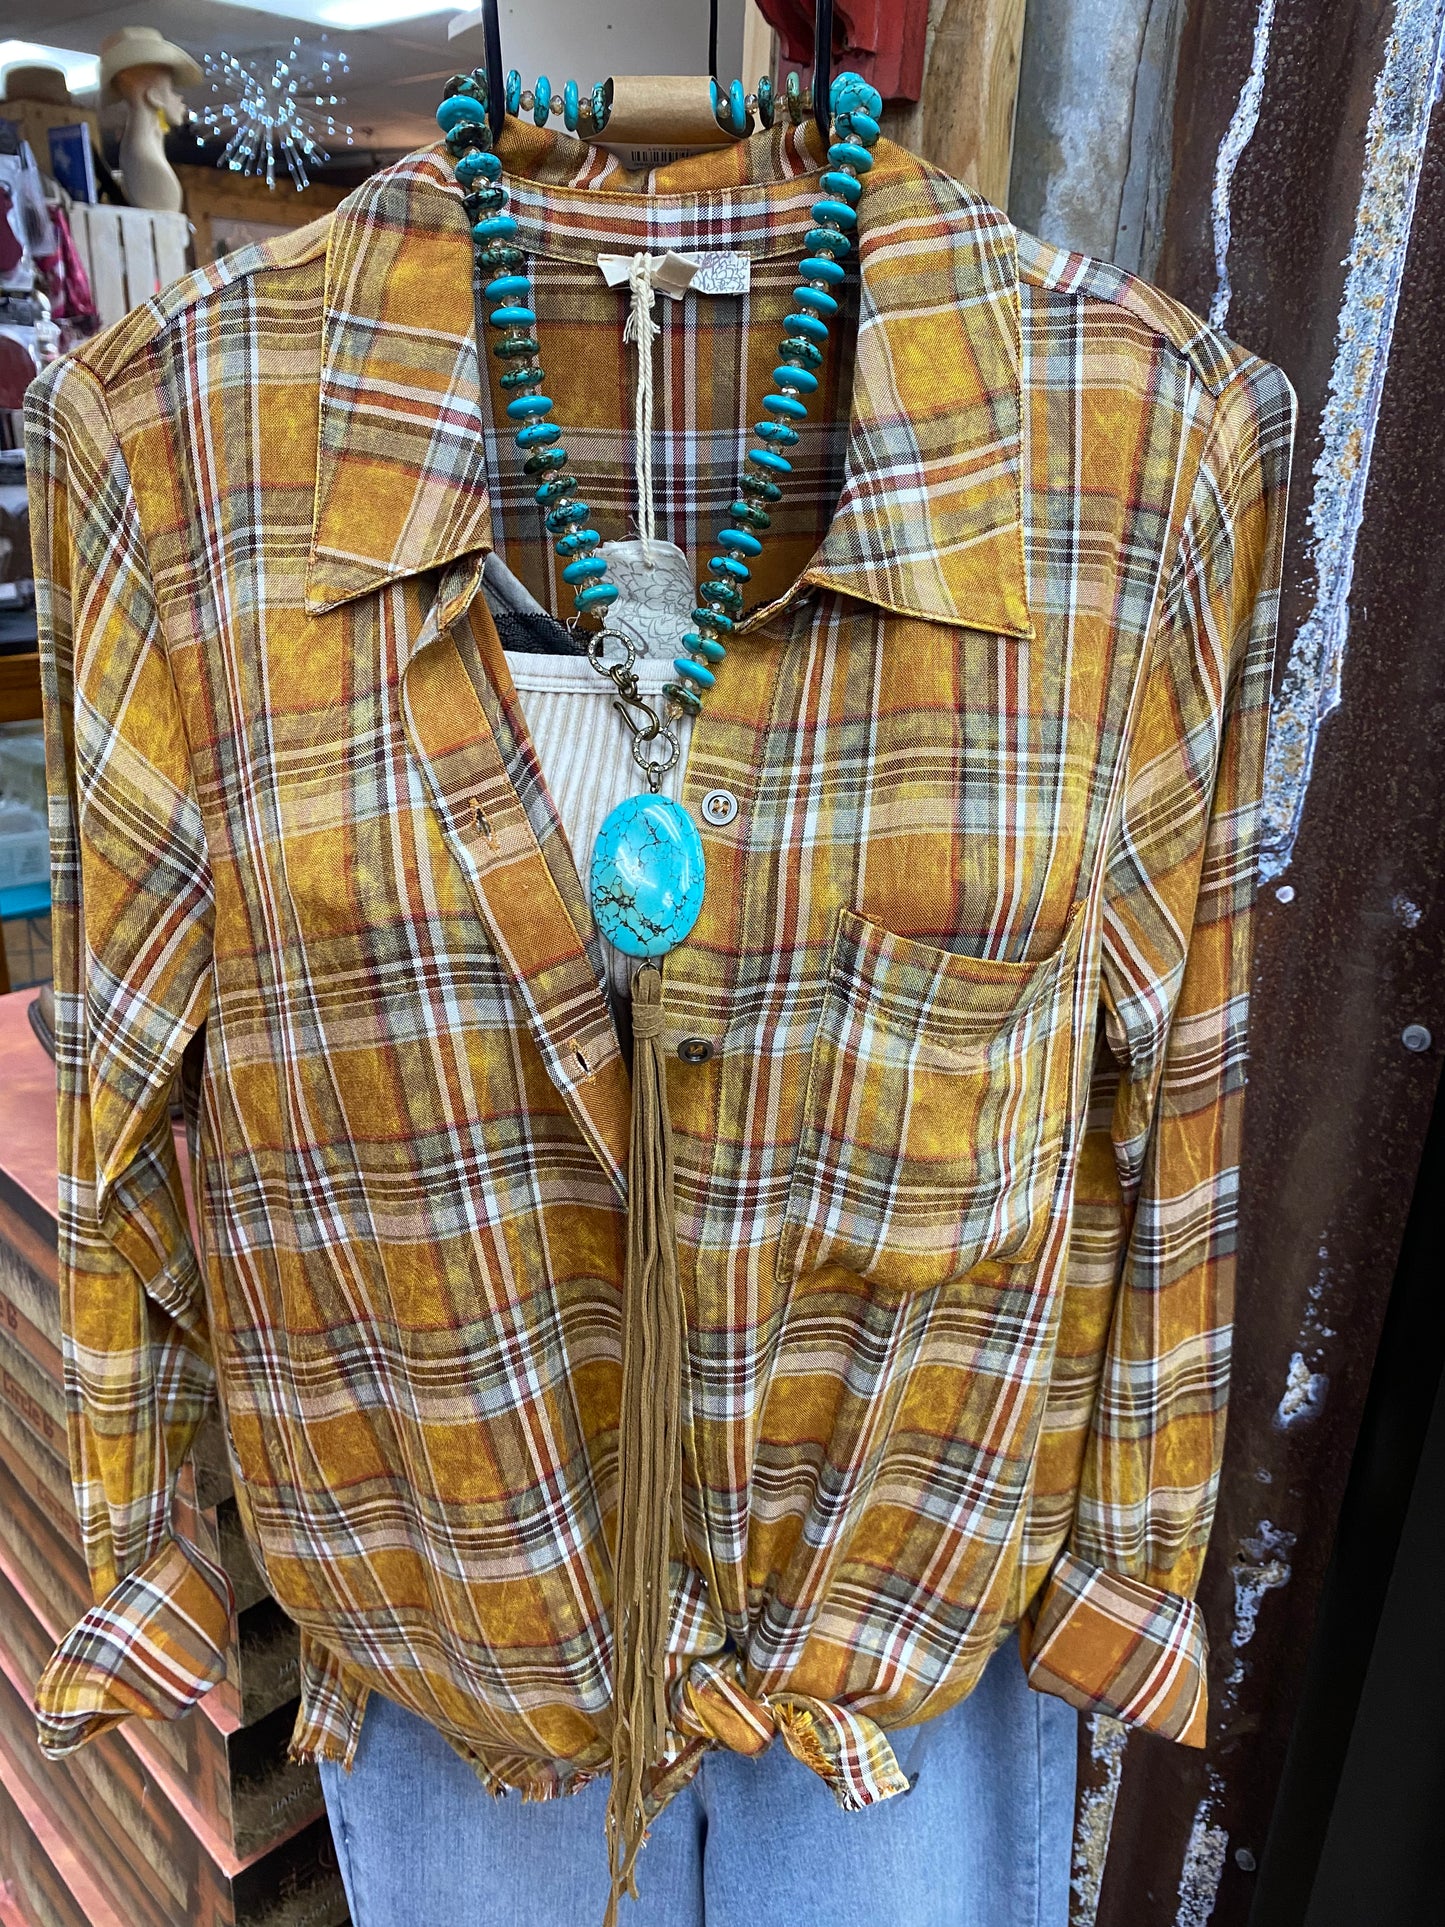 Strung Turquoise Necklace w/ Leather Tassel